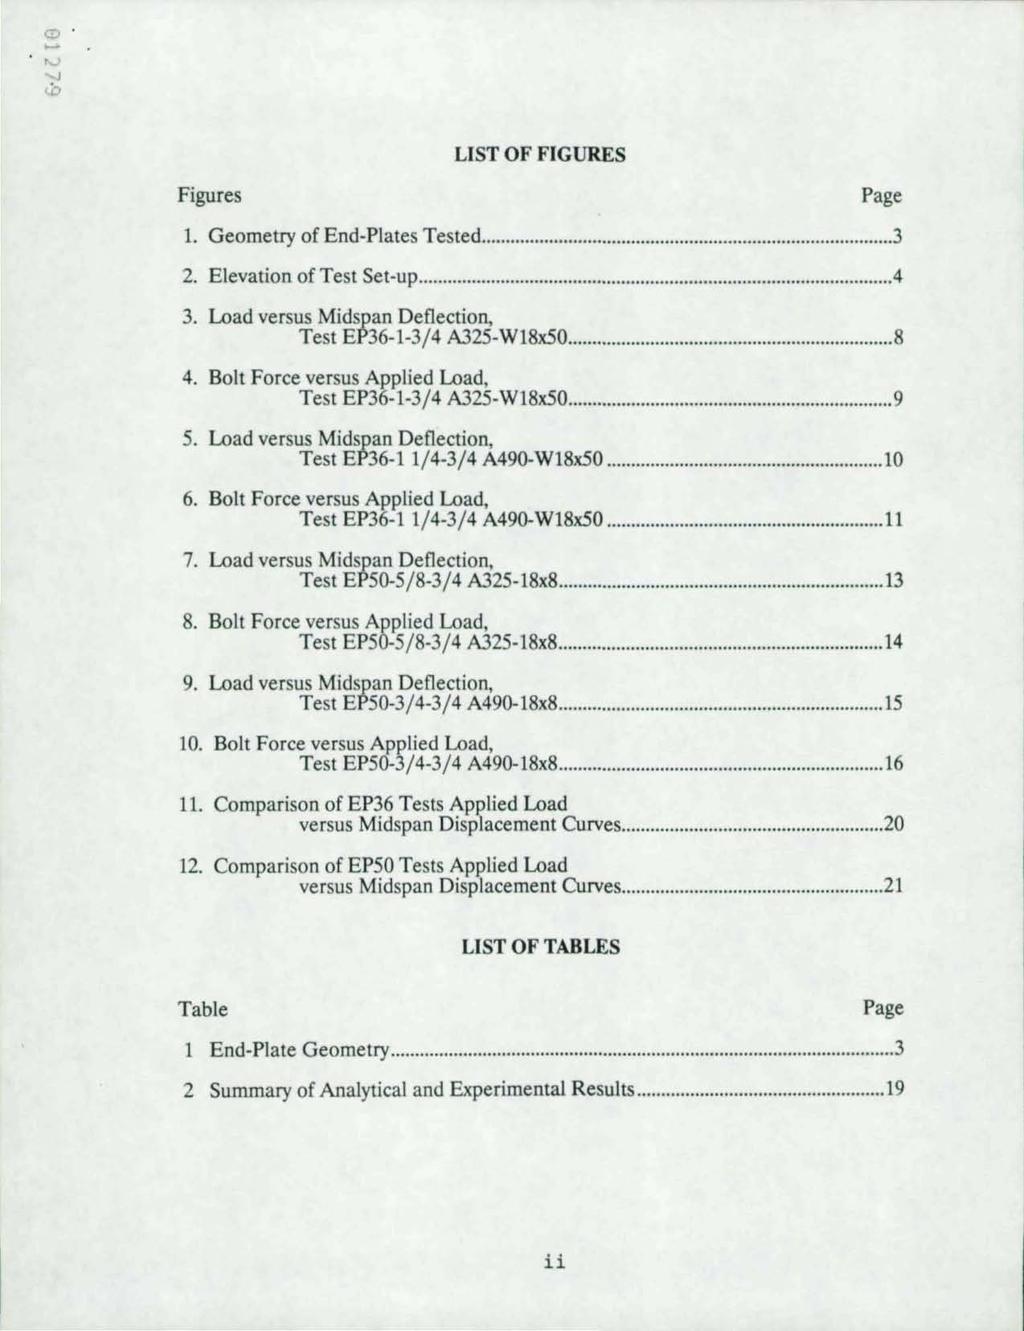 o LIST OF FIGURES Figures Page 1. Geometry of End-Plates Tested... 3 2. Elevation of Test Set-up... 4 3. Load versus Midspan Deflection, Test EP36-1-3/4 A325-WlBx5... B 4.